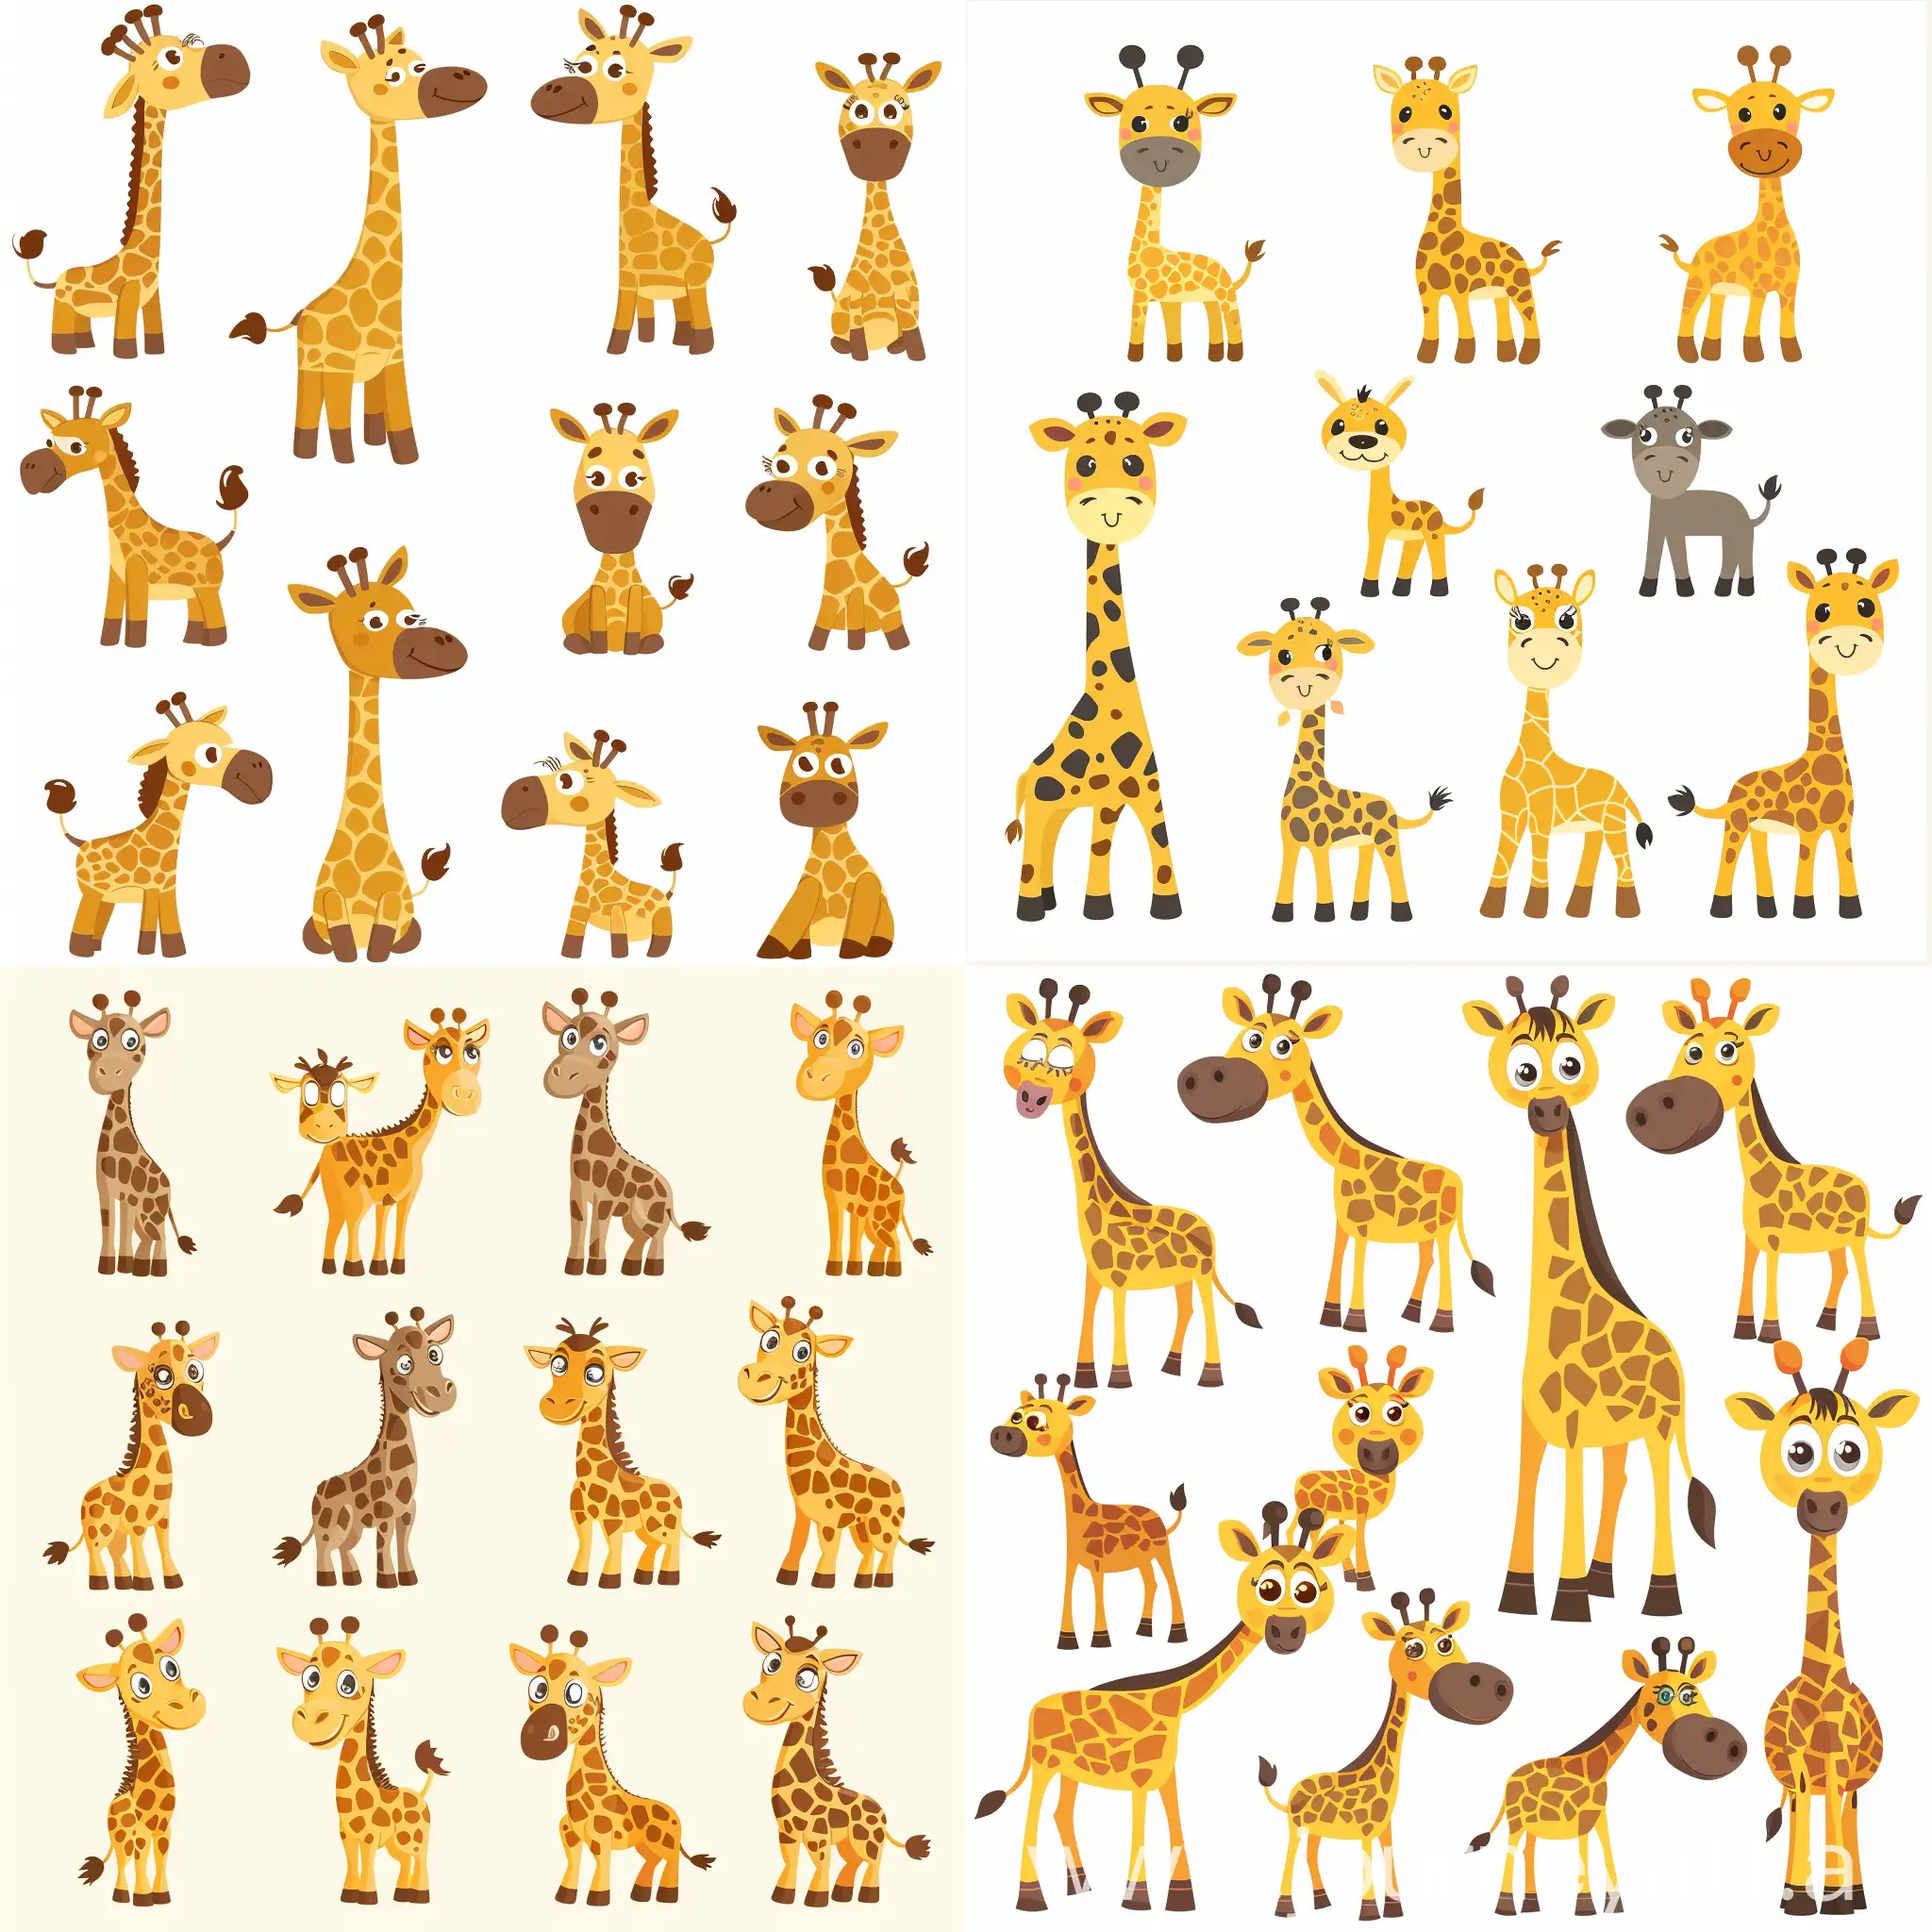 Adorable-Cartoon-Giraffe-Collection-Playful-and-Colorful-Vector-Illustrations